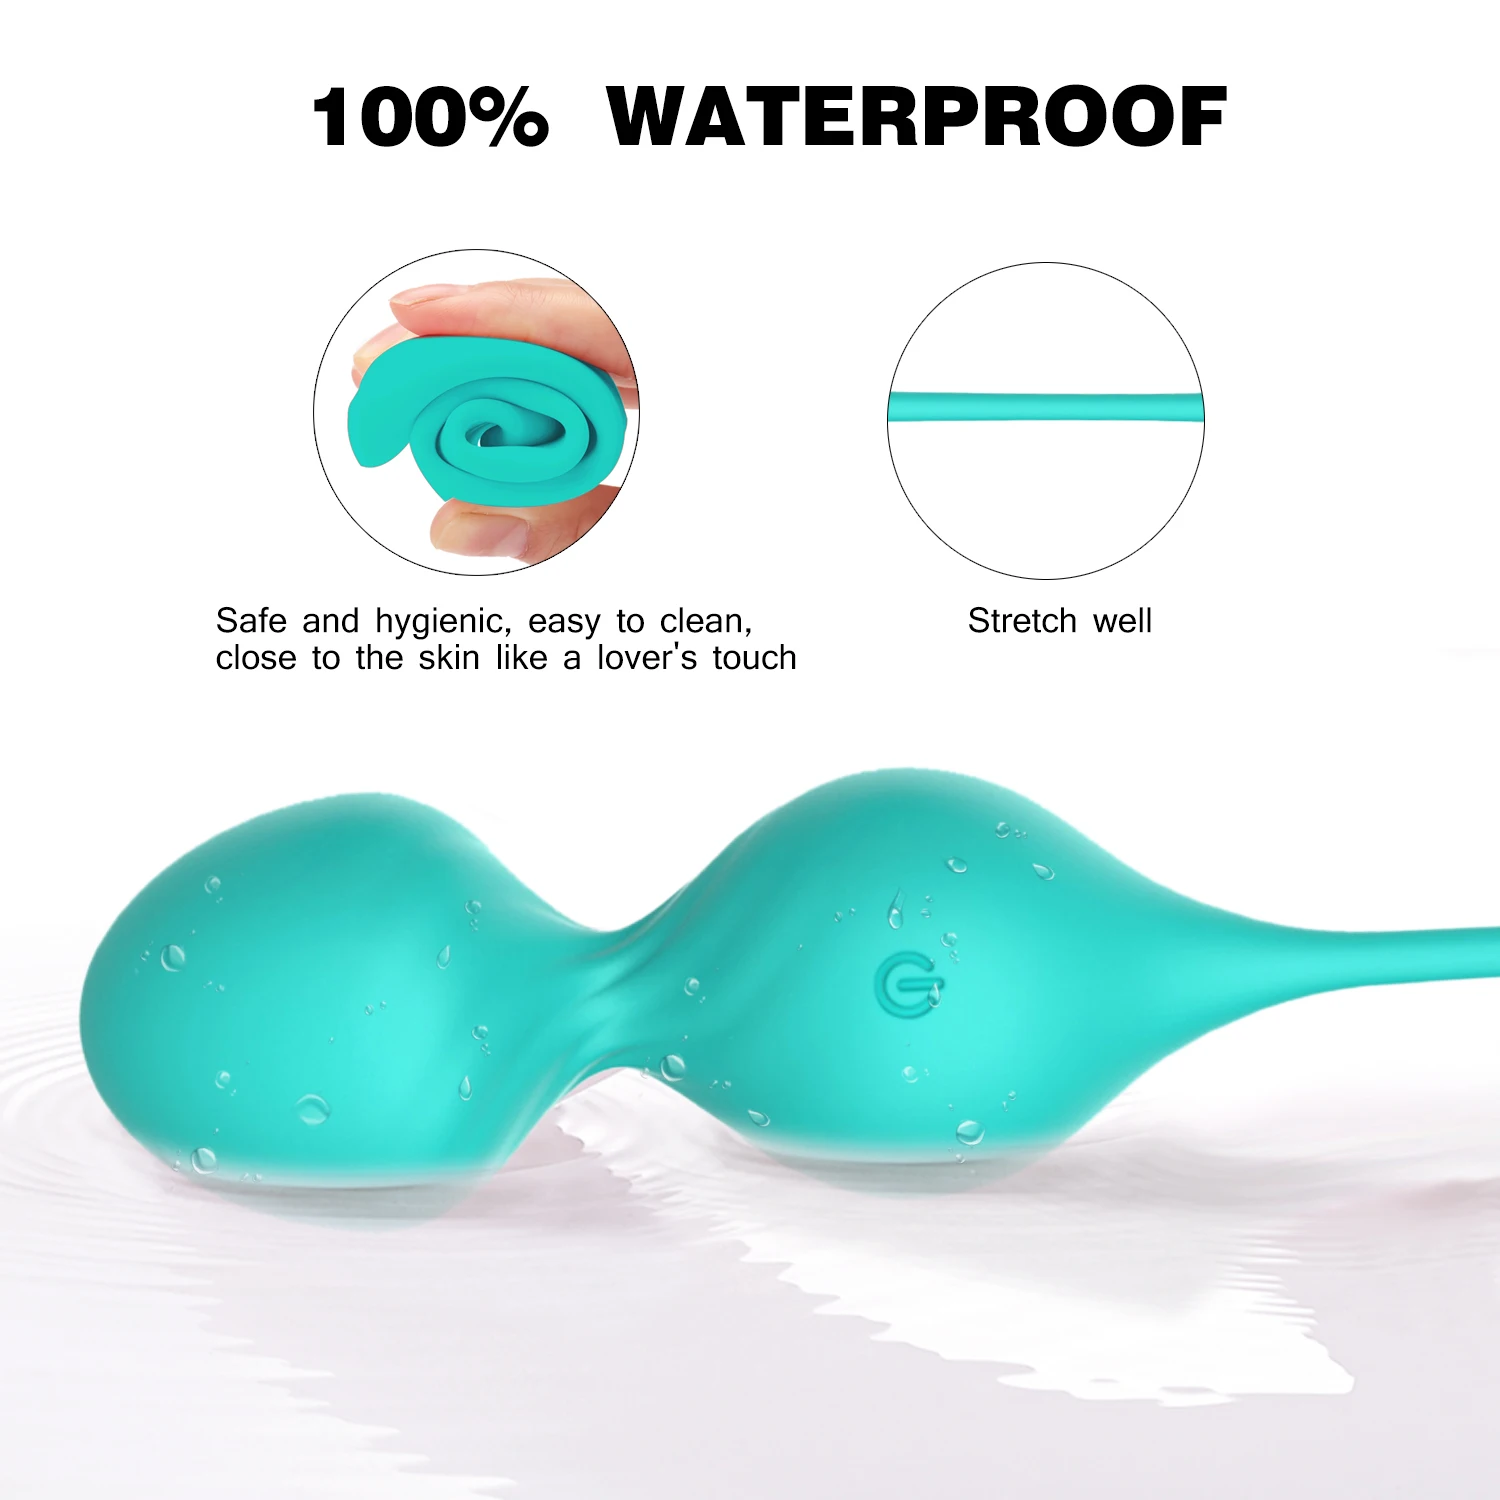 Full liquid Silicone Love egg Wireless Remote Control  double motors with strong vibration vibrator egg